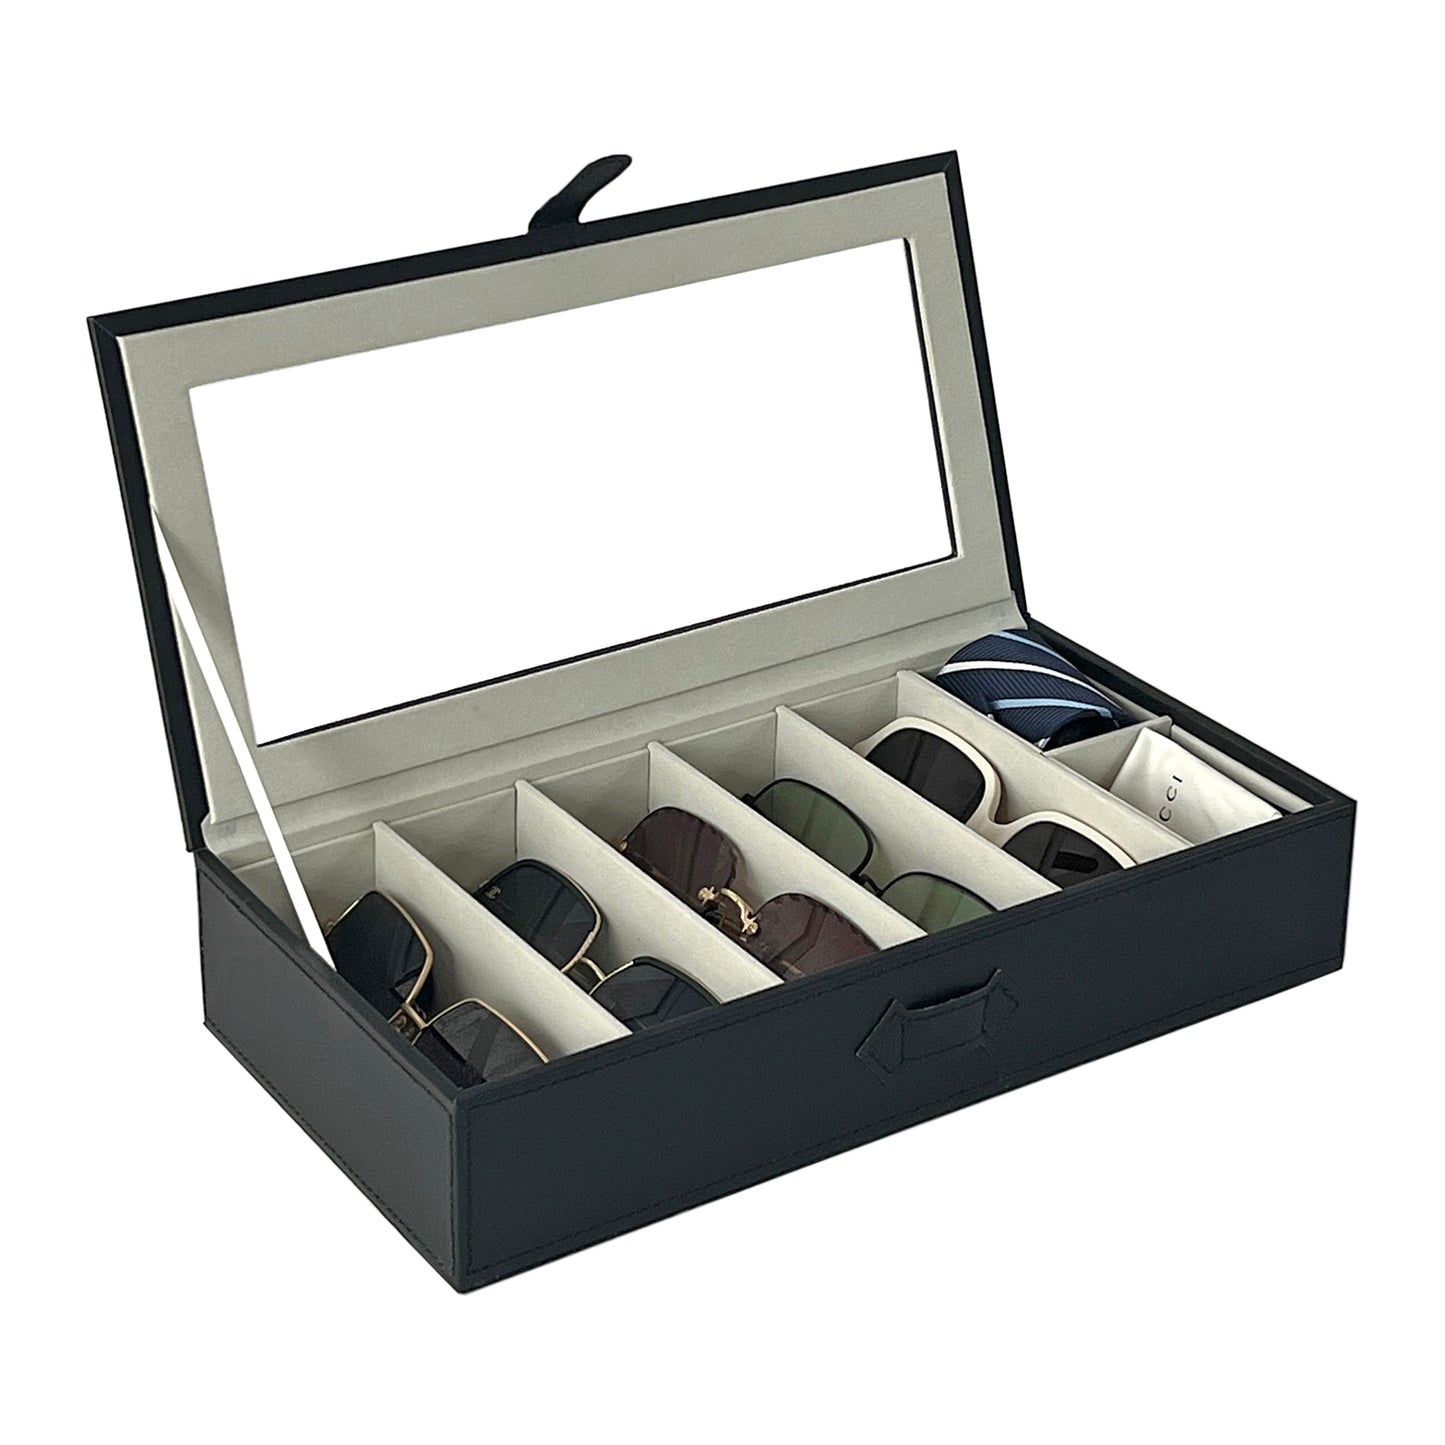 UnionPlus Multiple Sunglasses Organizer Collector, 5 Slots for Sunglasses and 2 Small Slots for Accessories